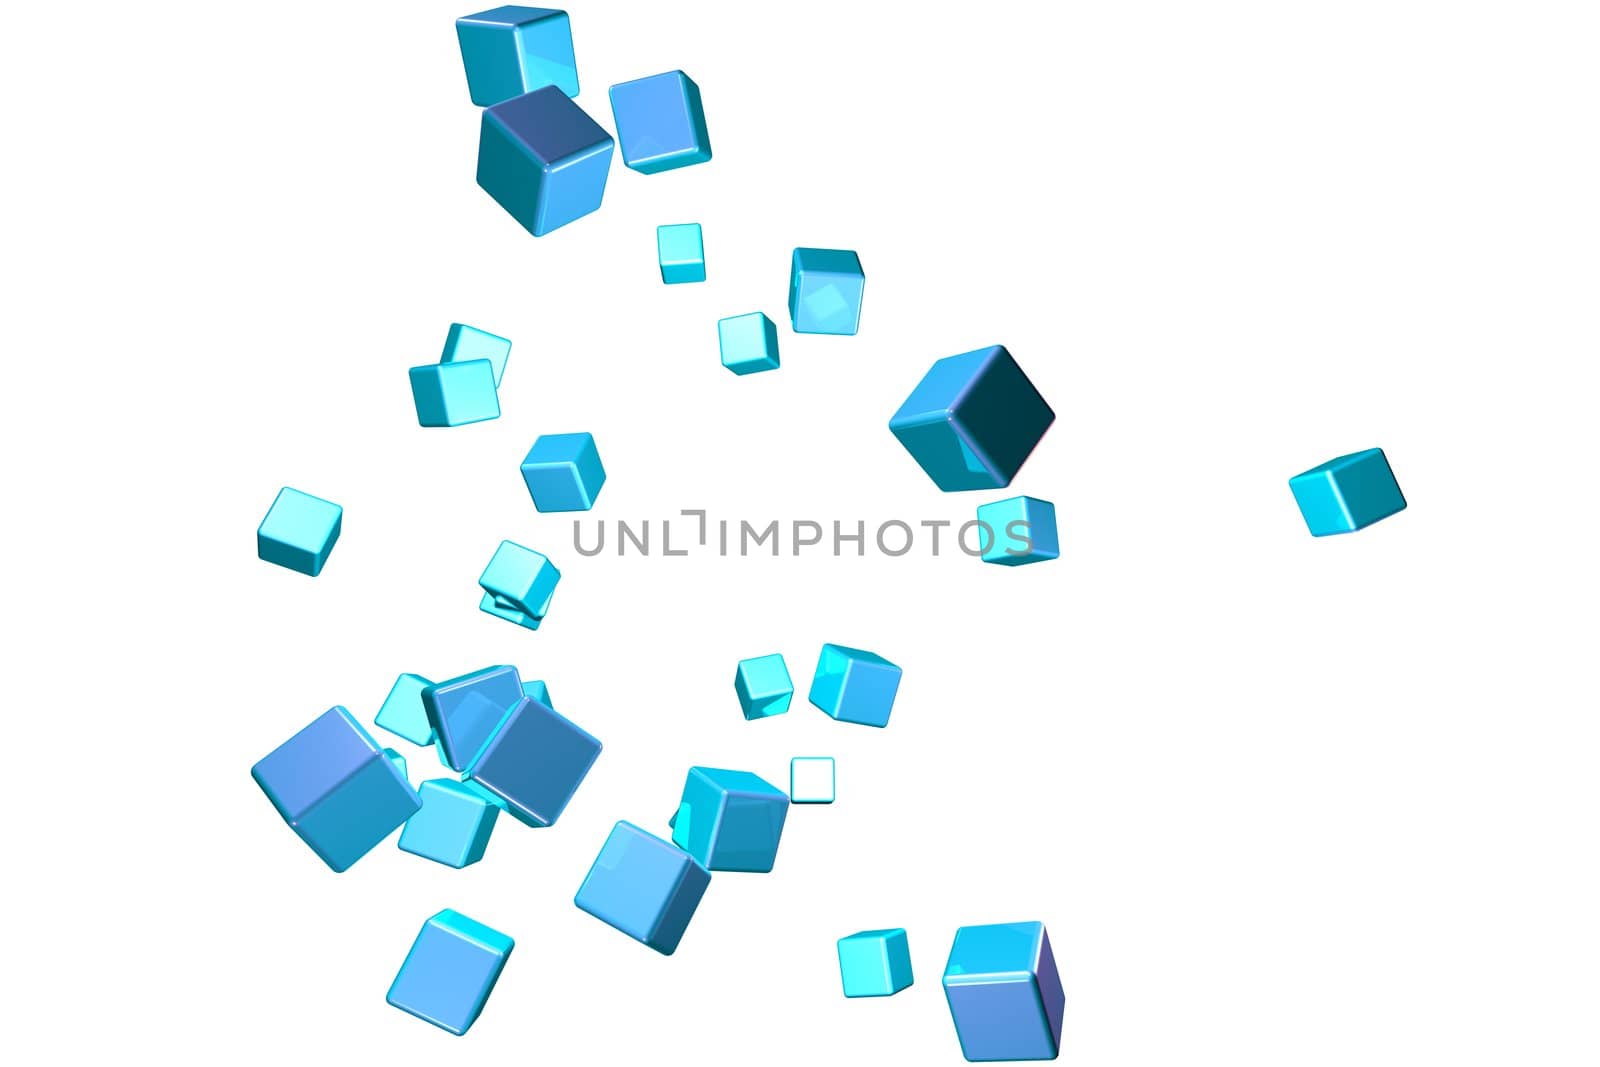 3D rendered abstract background. Isolated on white.